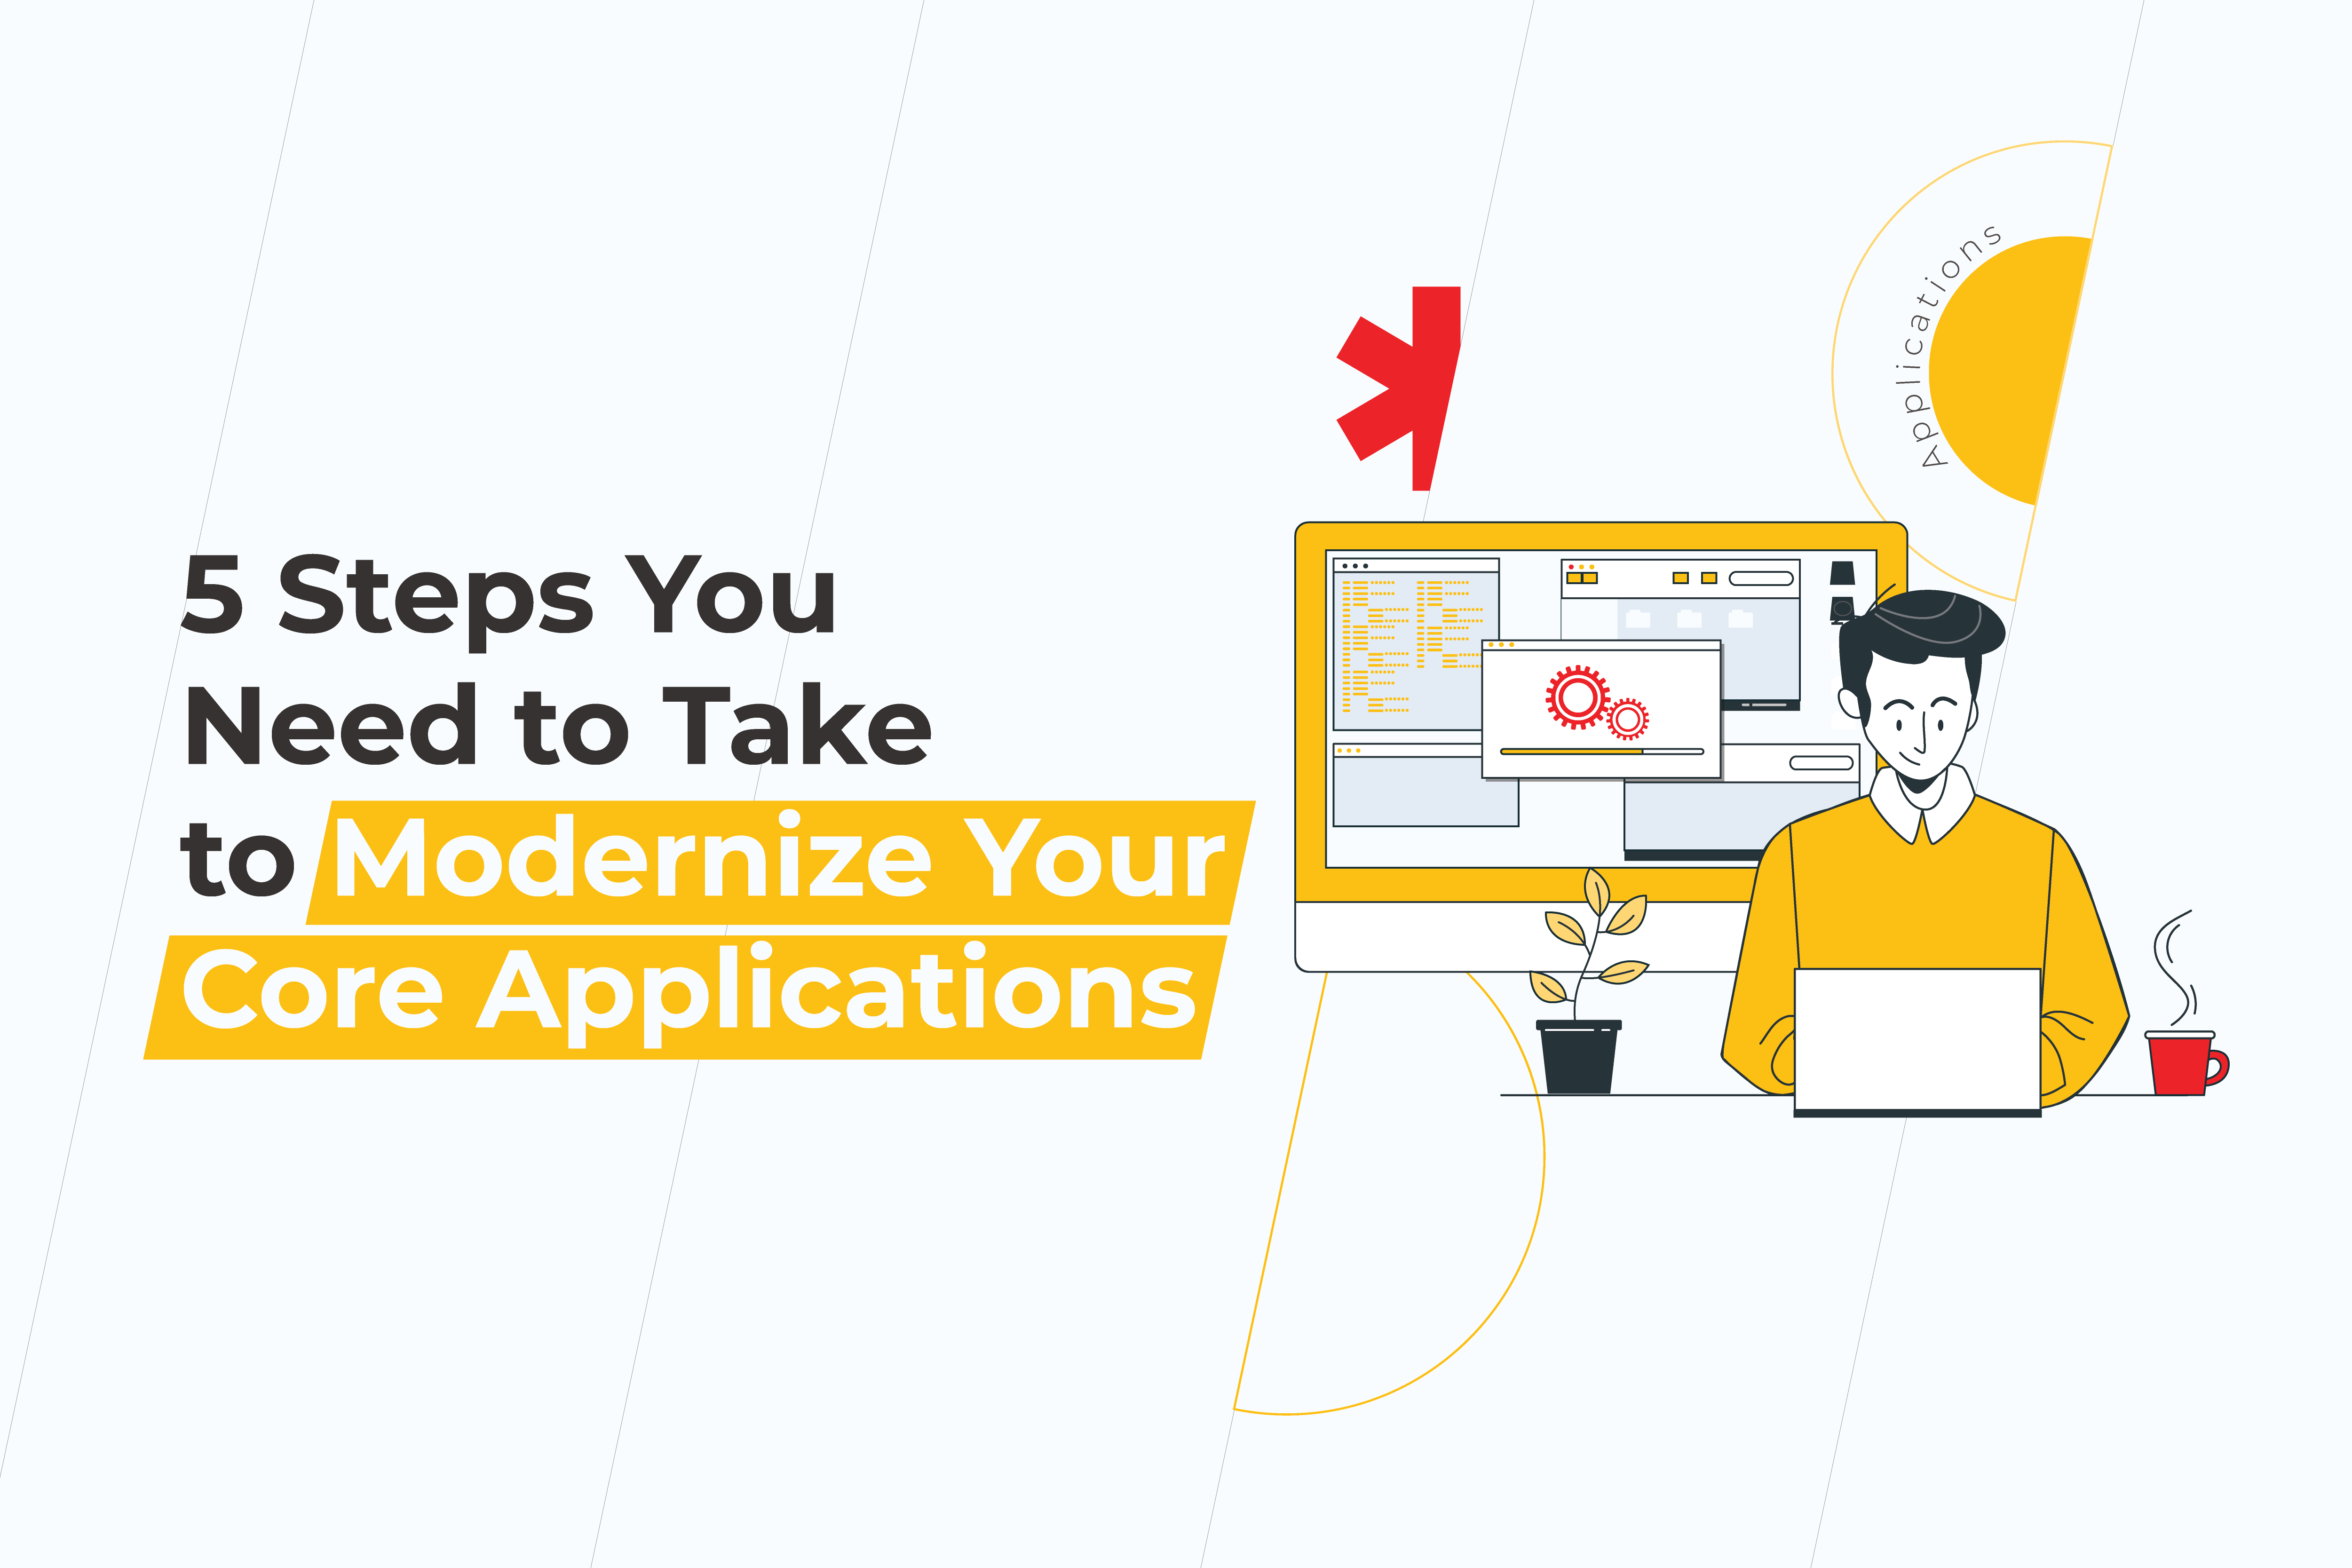 5 Steps You Need to Take to Modernize Your Core Applications